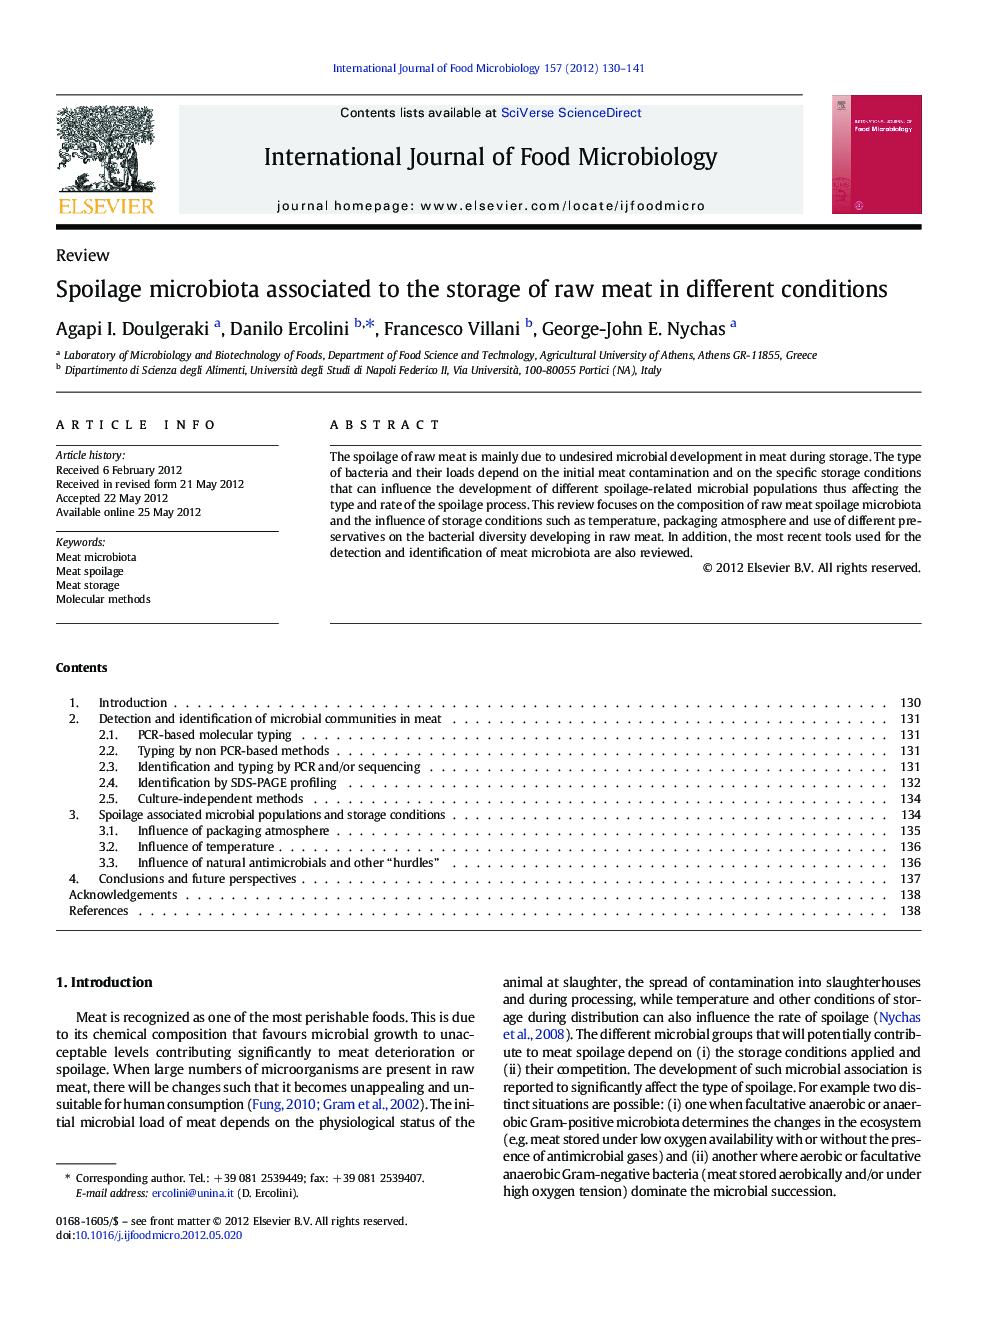 Spoilage microbiota associated to the storage of raw meat in different conditions